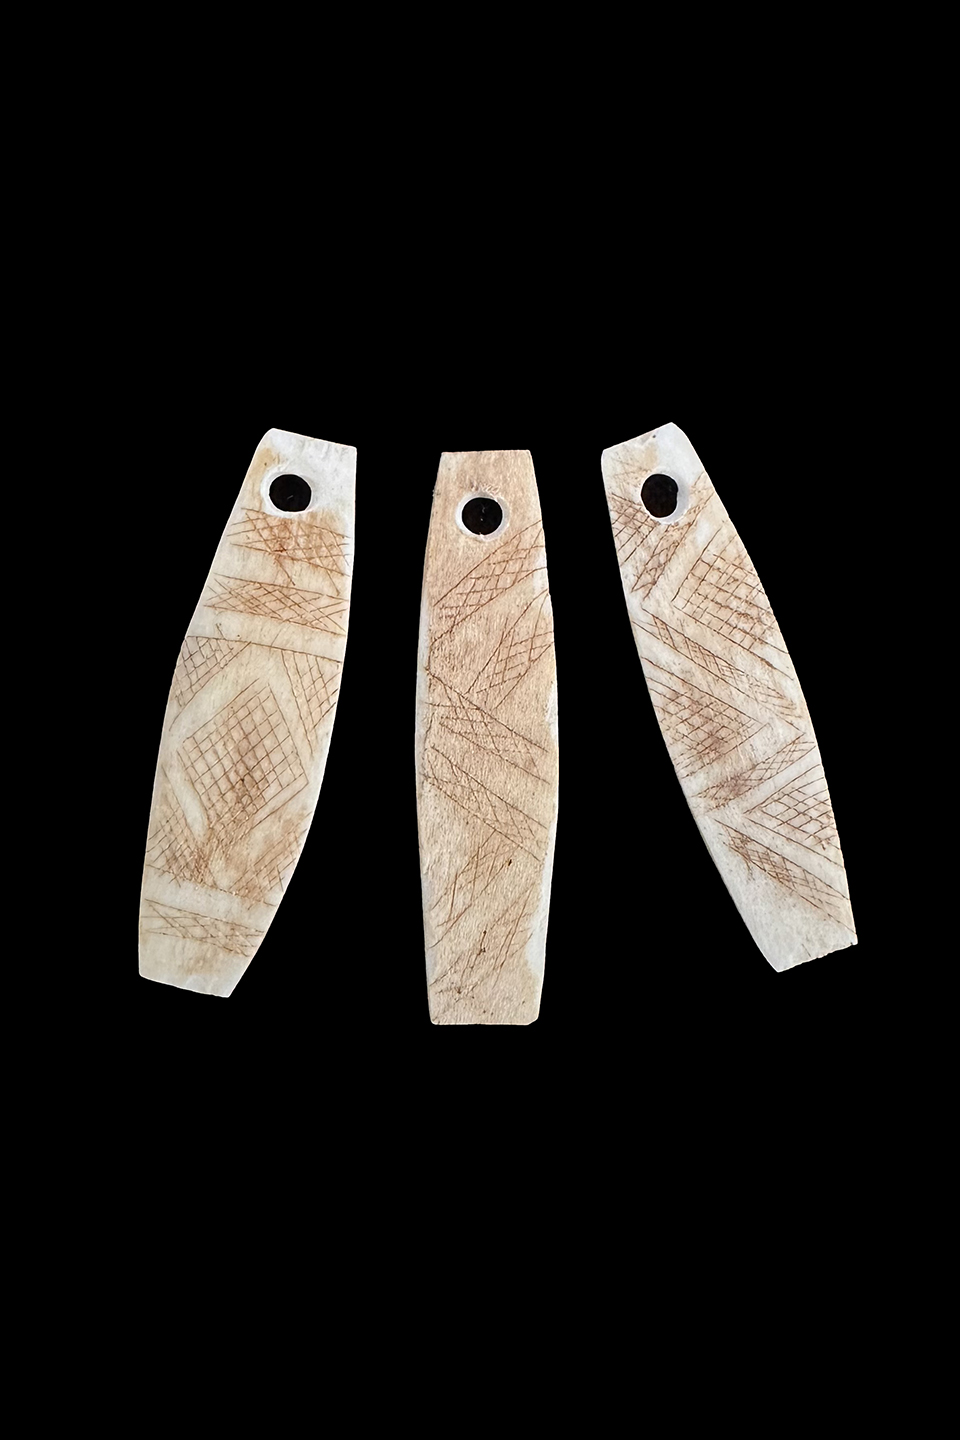 3 Incised Bone Pendants from Baby Carrier - Shipibo-Conibo and Campa people, Peru